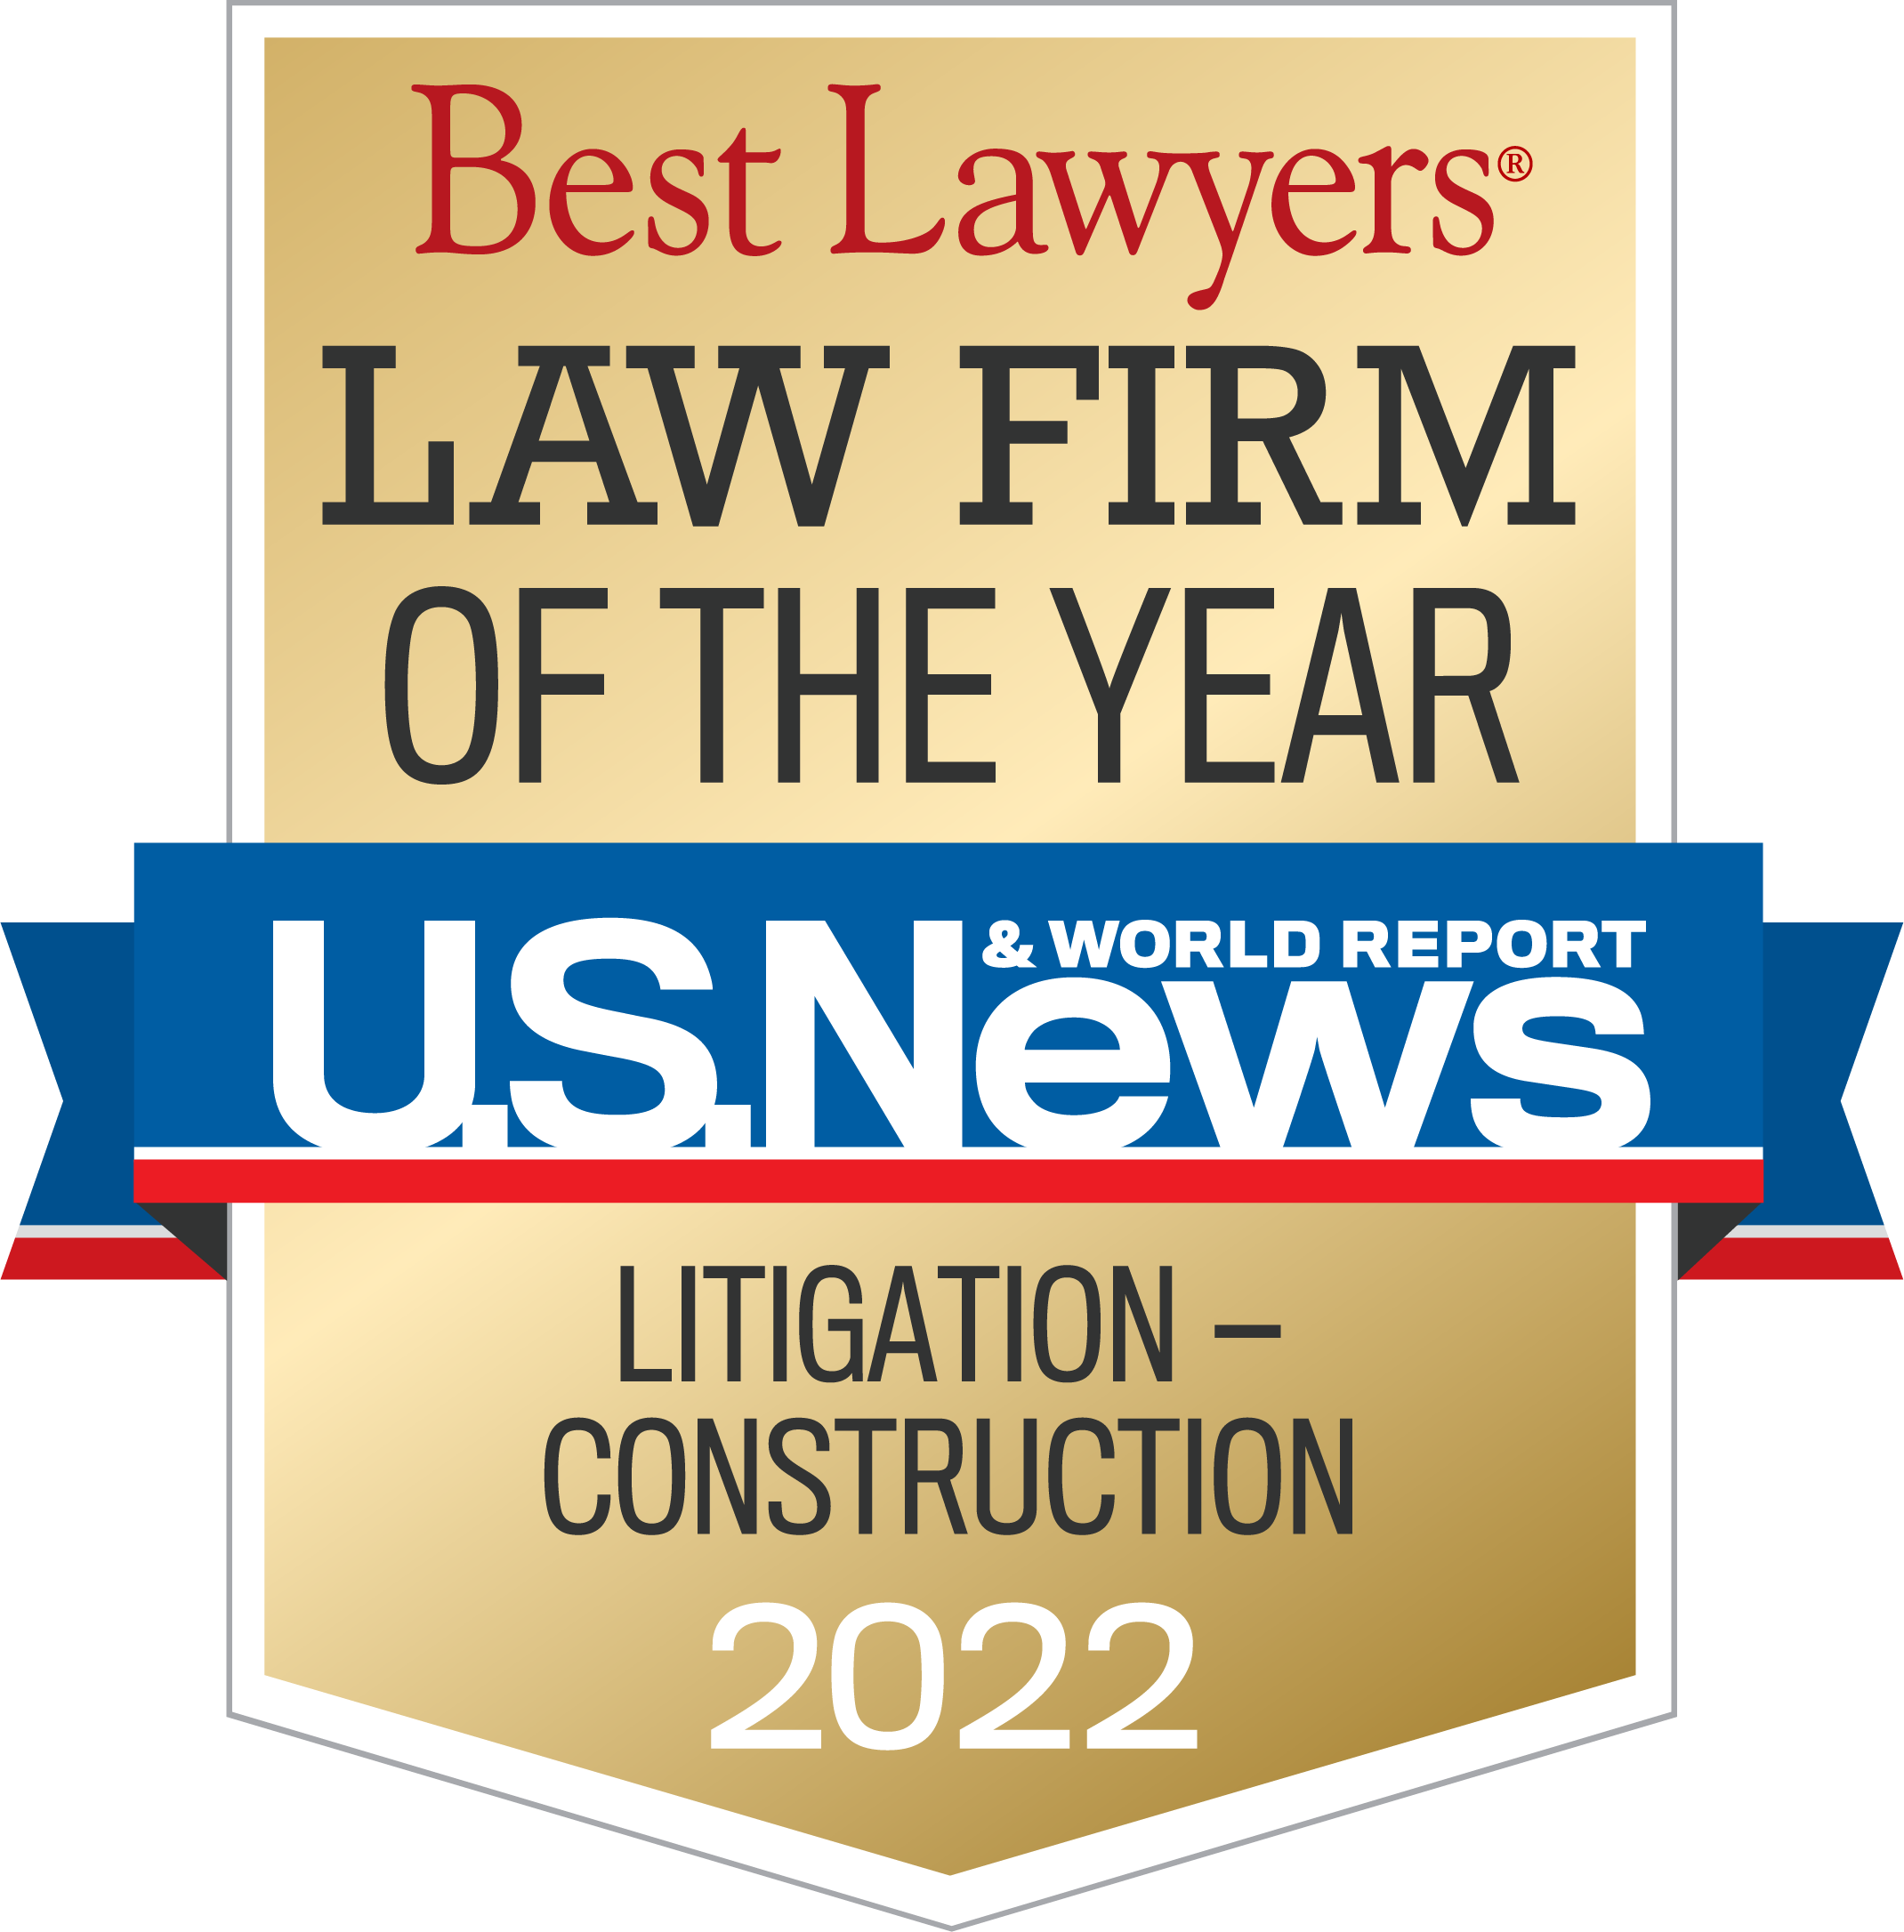 Best Lawyers Law Firm of the Year 2022 Litigation-Construction